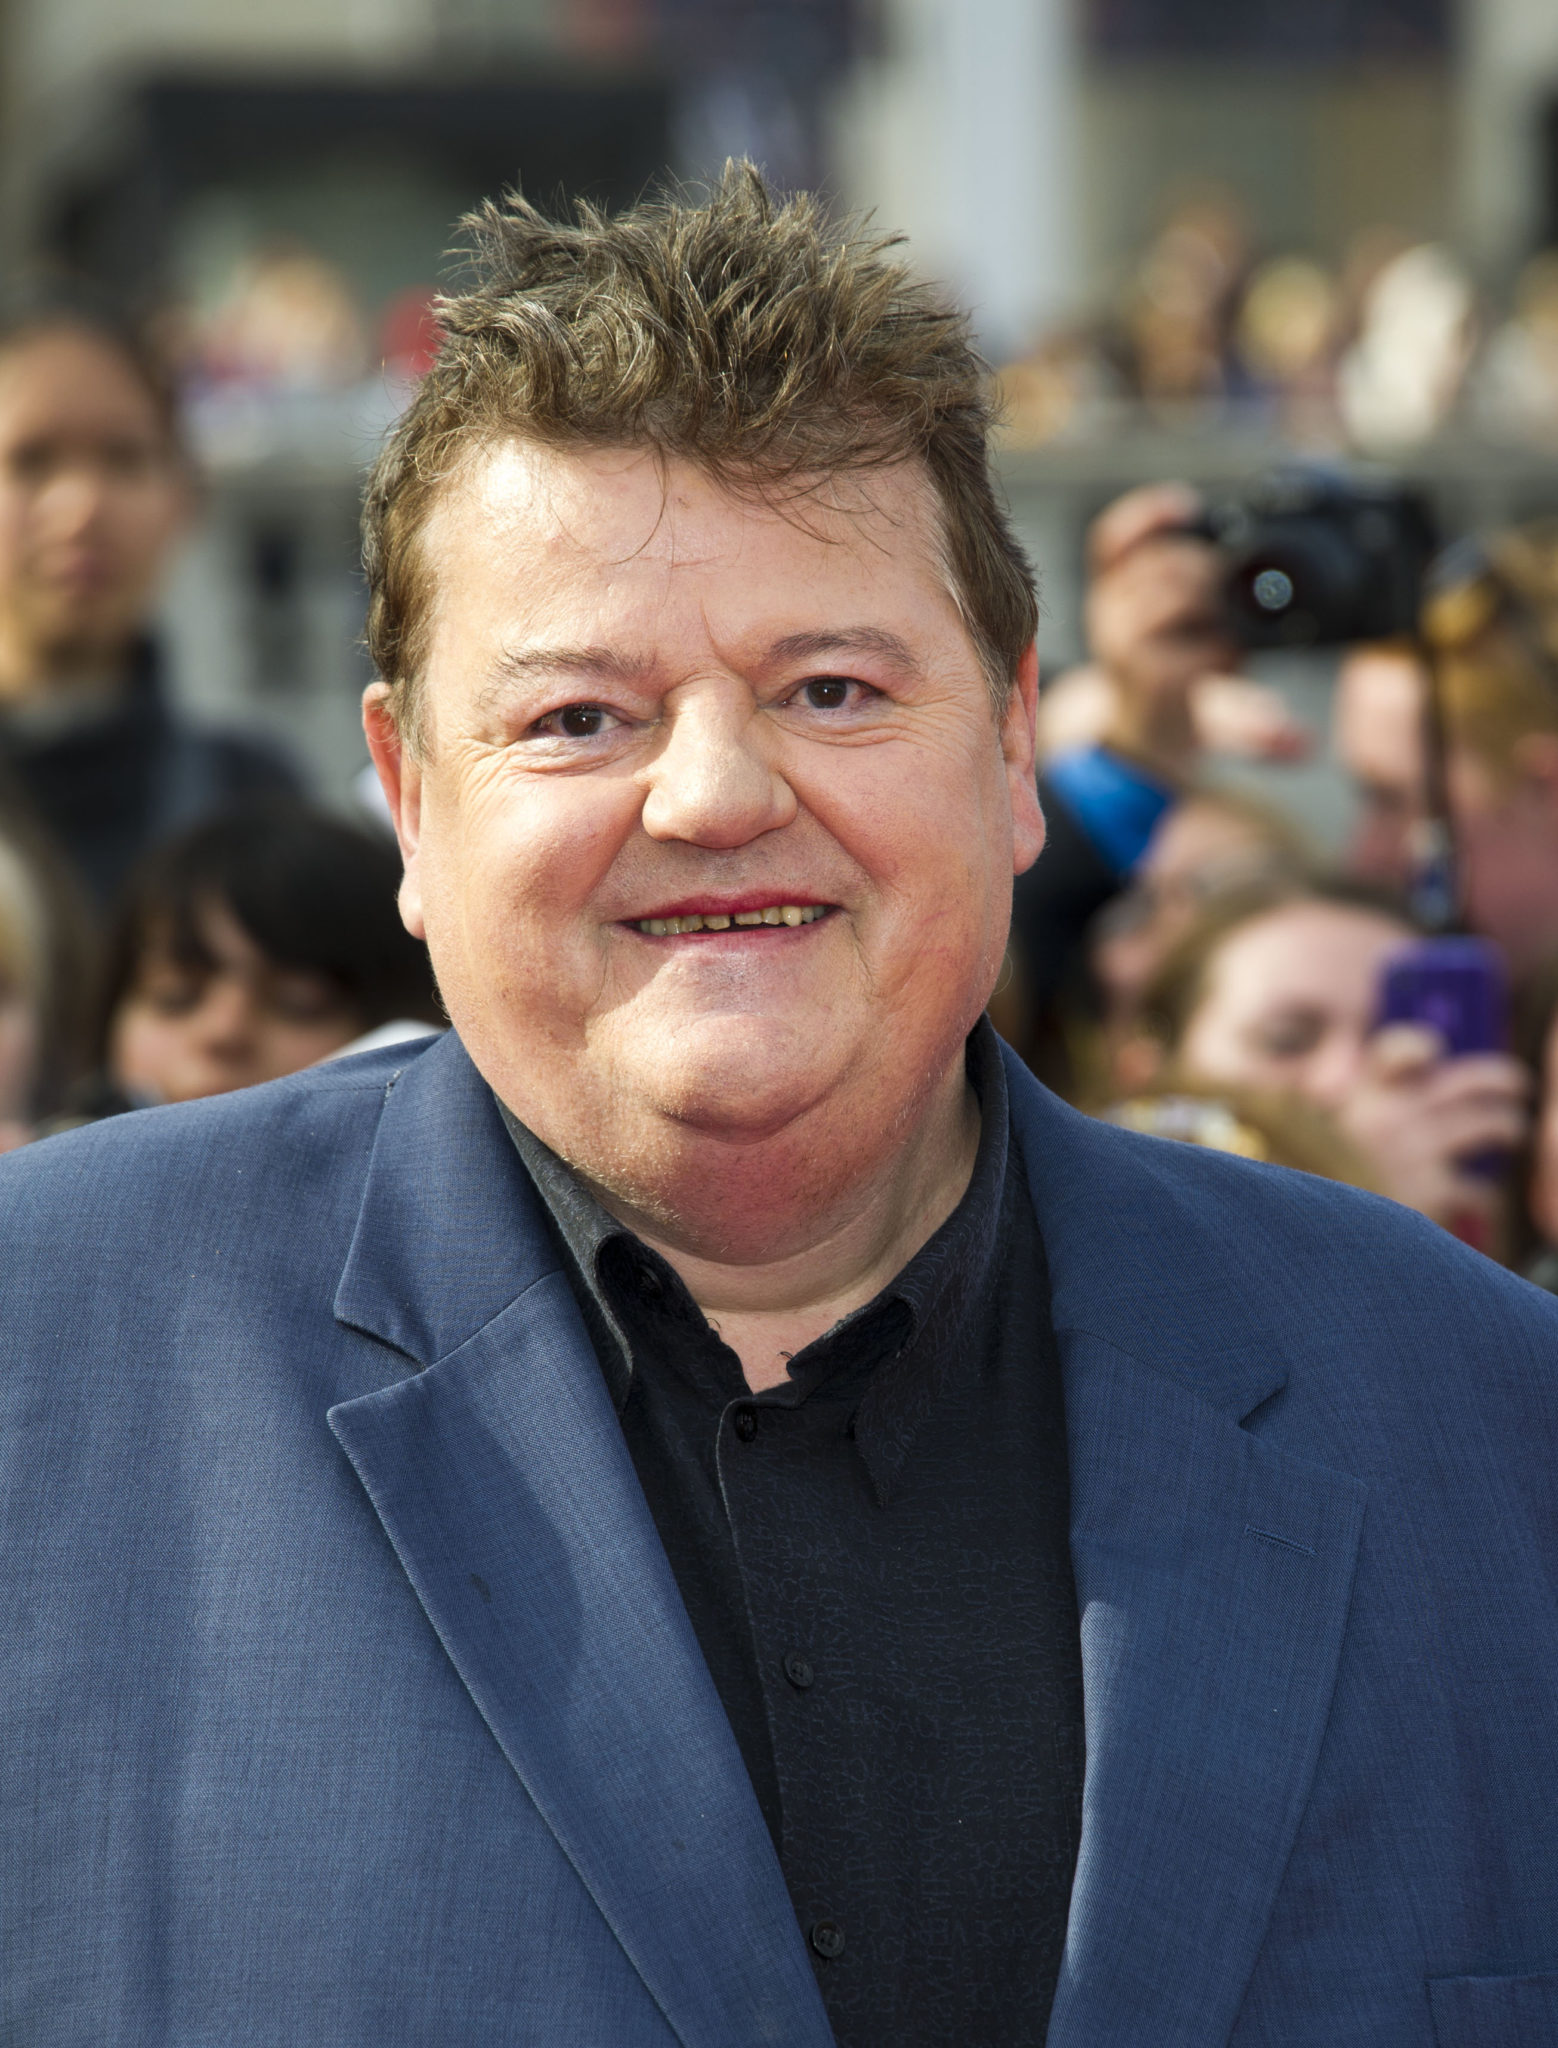 New Details Emerge In The Death Of Harry Potter Actor Robbie Coltrane Cause Of Death Finally 6029